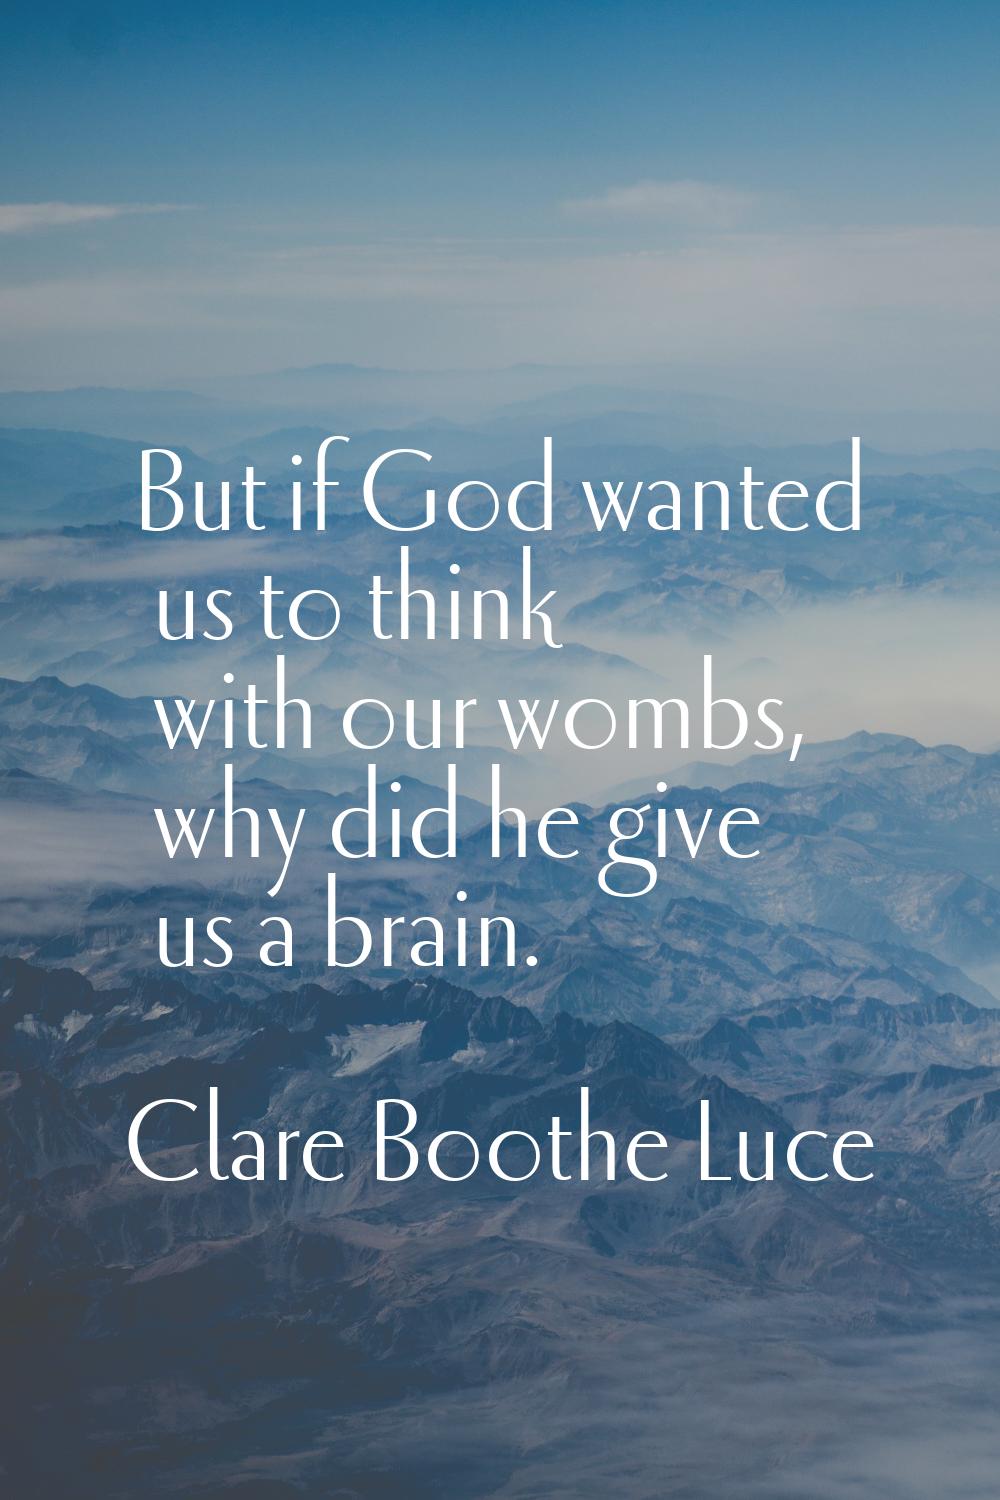 But if God wanted us to think with our wombs, why did he give us a brain.